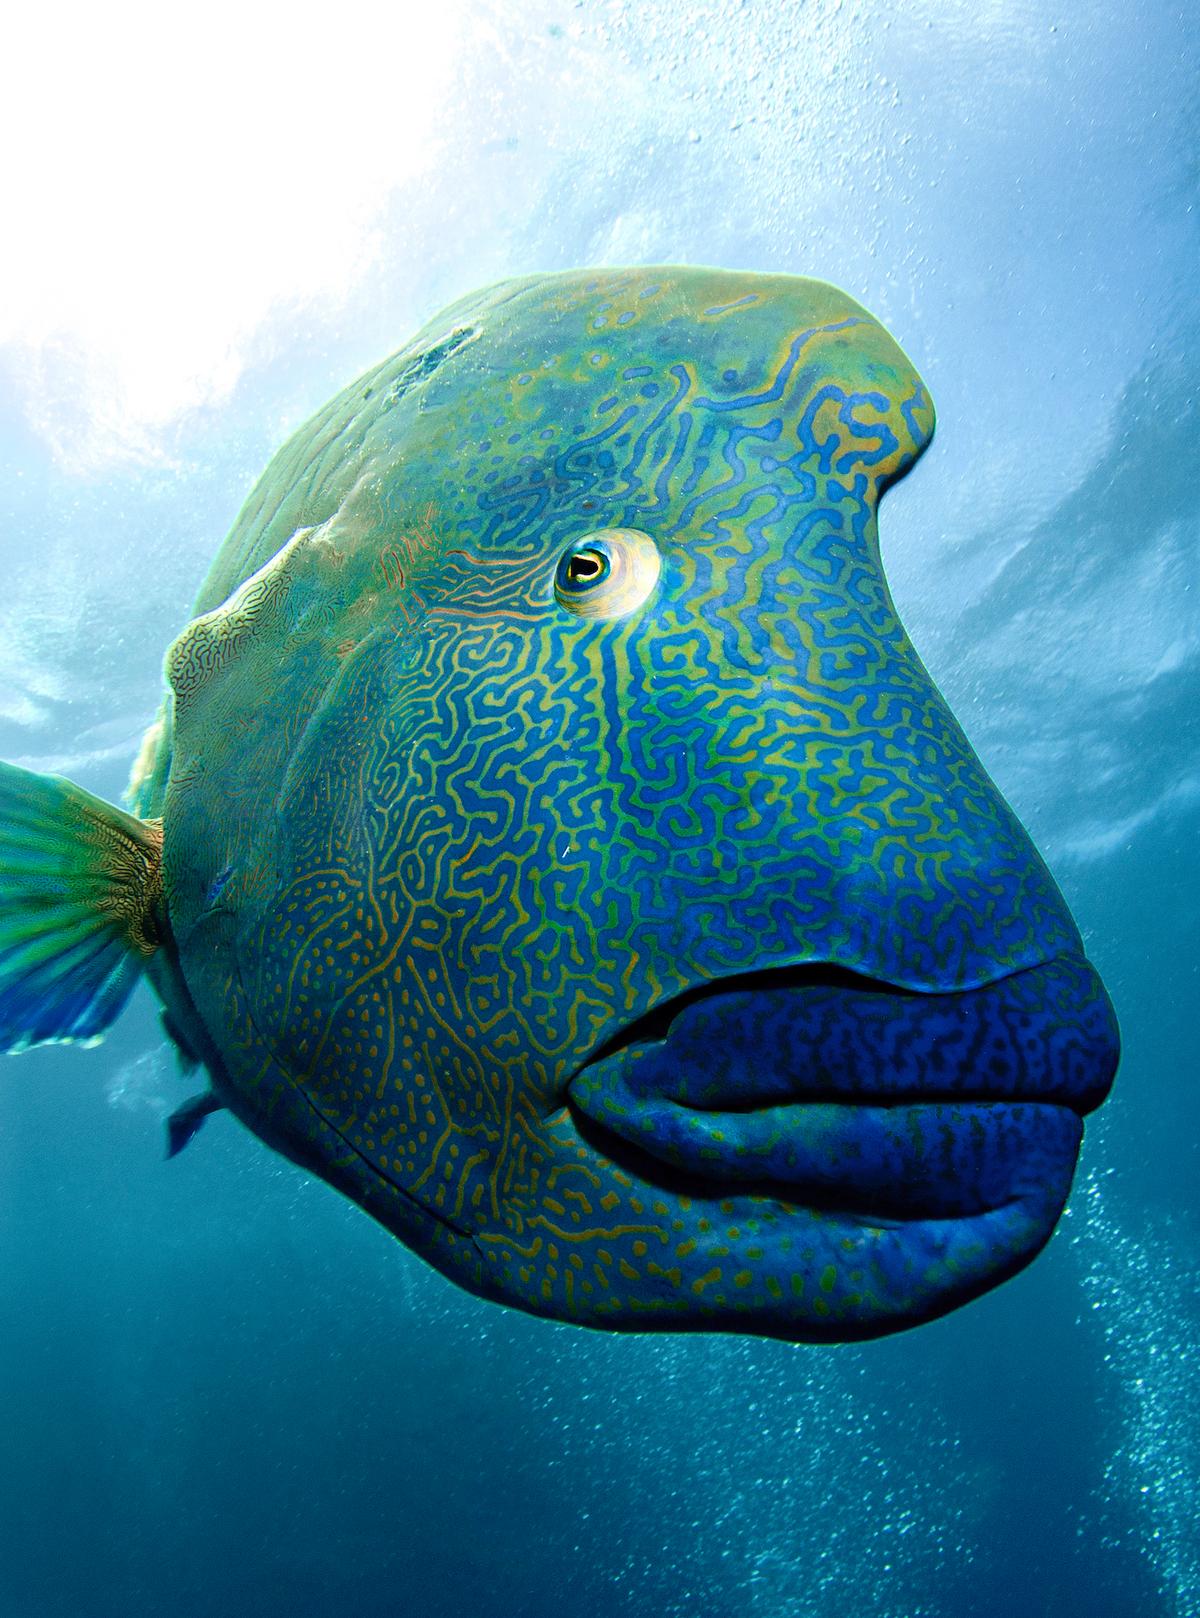 Napoleon wrasse, scientific name Cheilinus undulatus, is the largest member of the Labridae family of carnivorous fish. (Caters News)